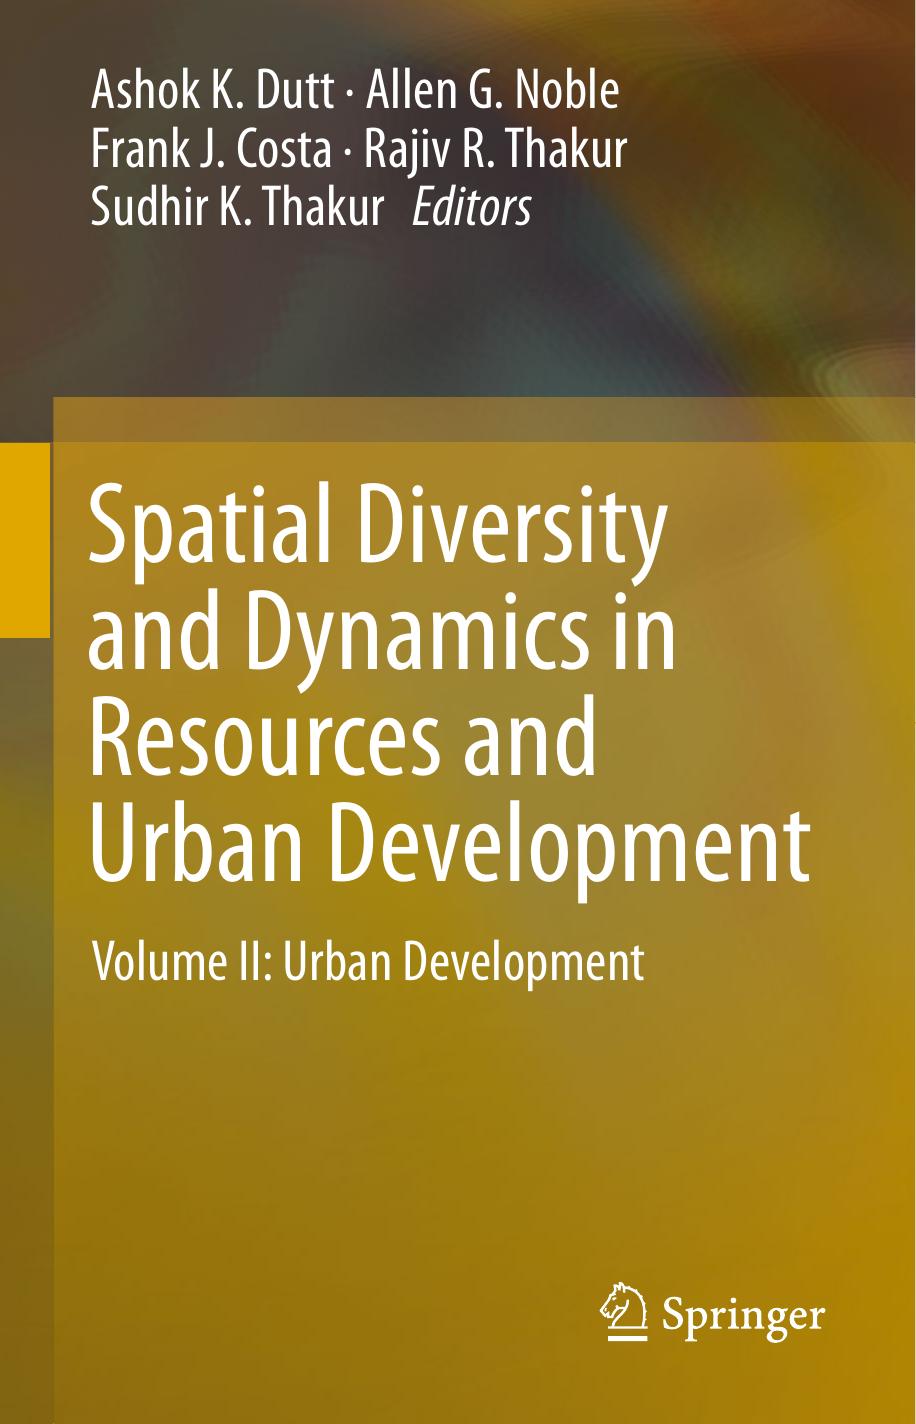 Spatial Diversity and Dynamics in Resources and Urban Development Volume II Urban Development 2016